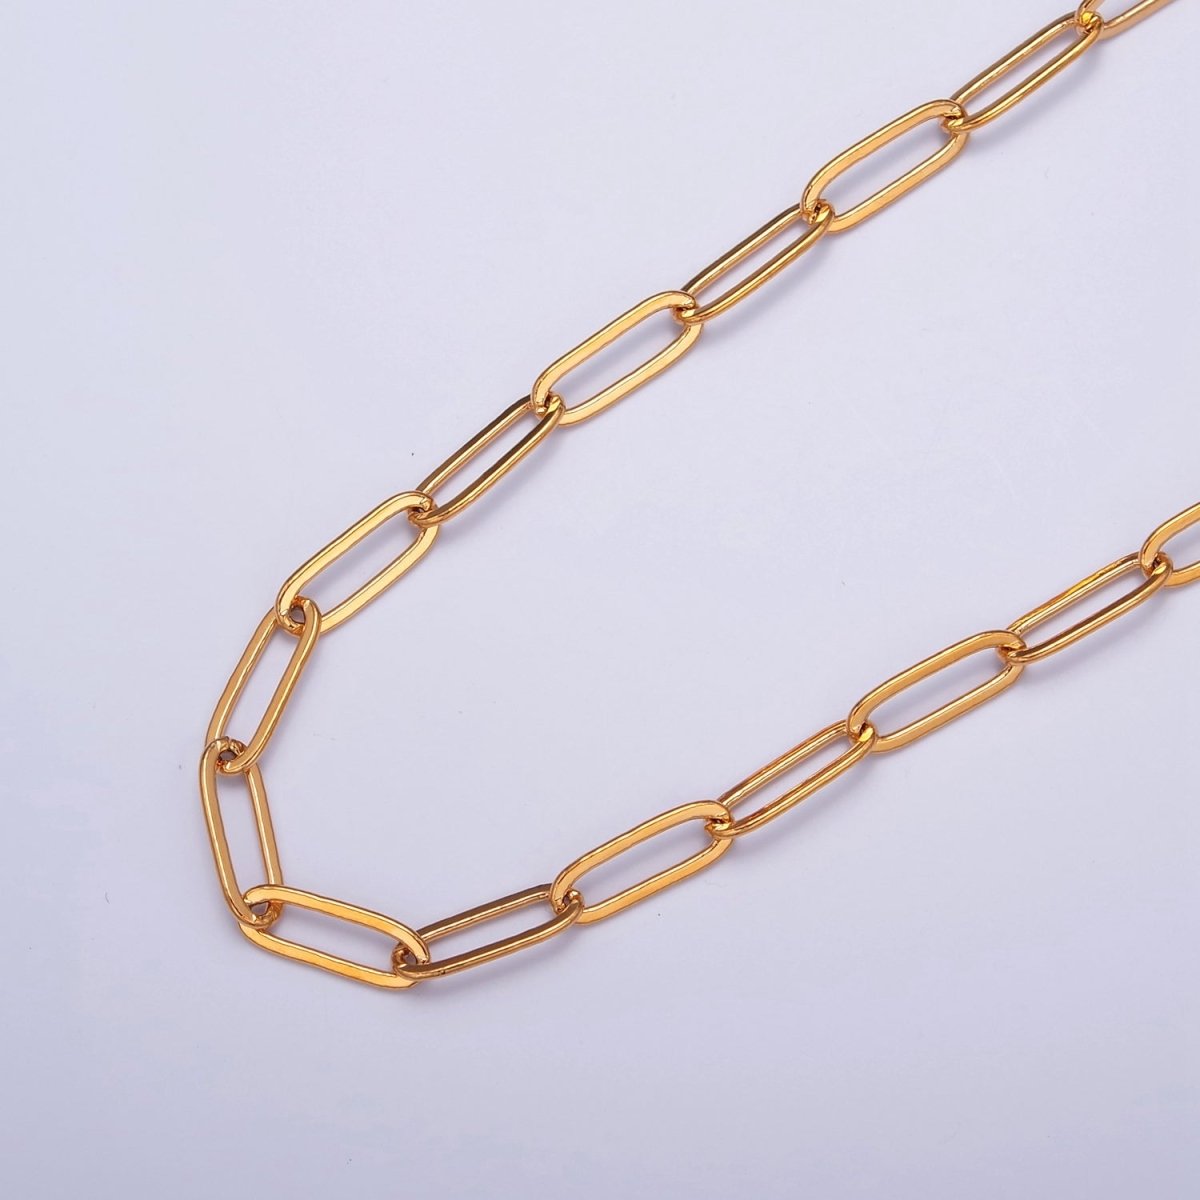 Oval PaperClip Unfinished Chain, 14mm x 5mm, 24k Gold Filled Chain 19.5 inch long | WA-1381 Clearance Pricing - DLUXCA